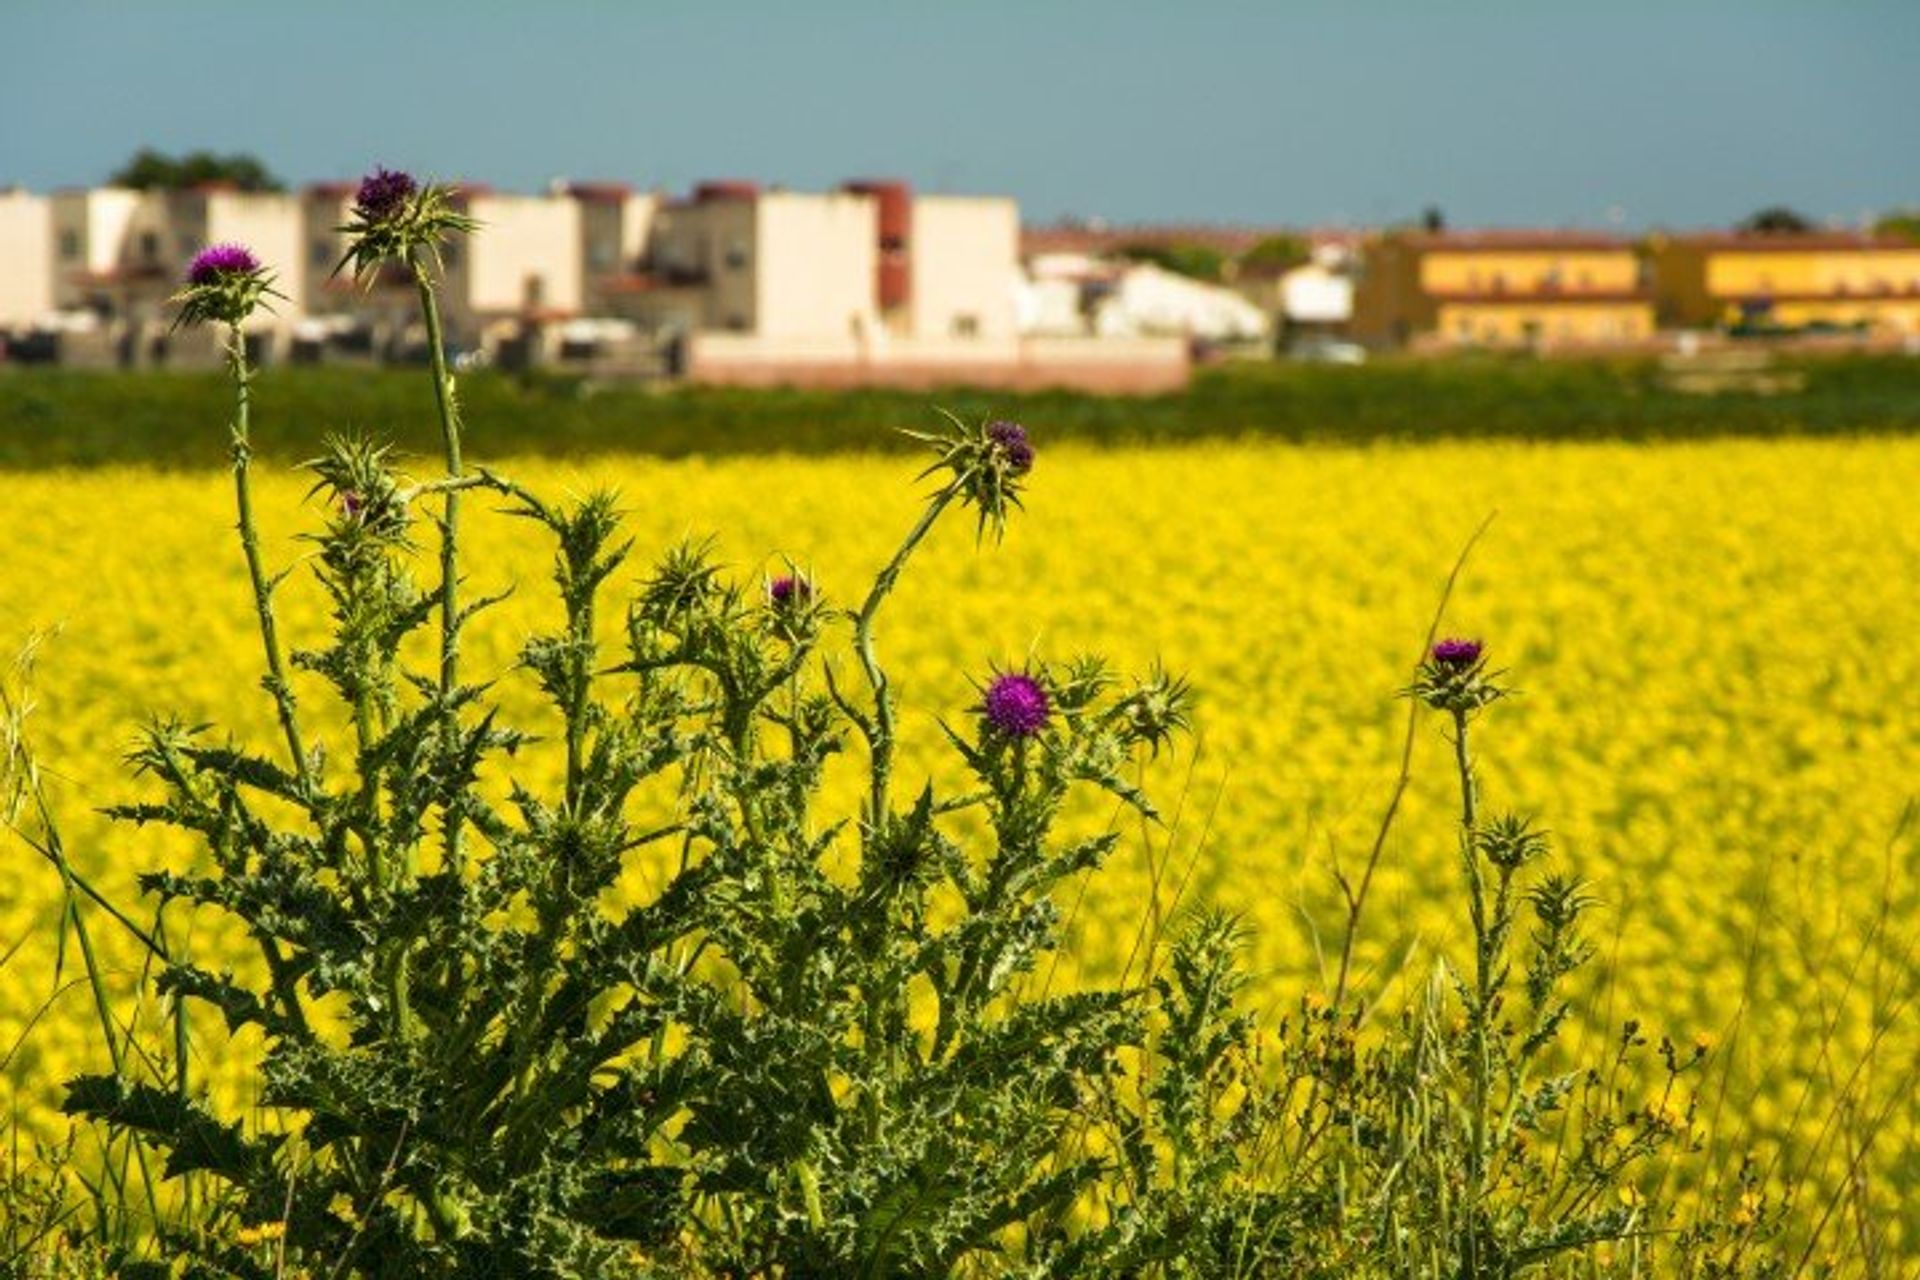 The colourful fields of rapeseed that adorn the region